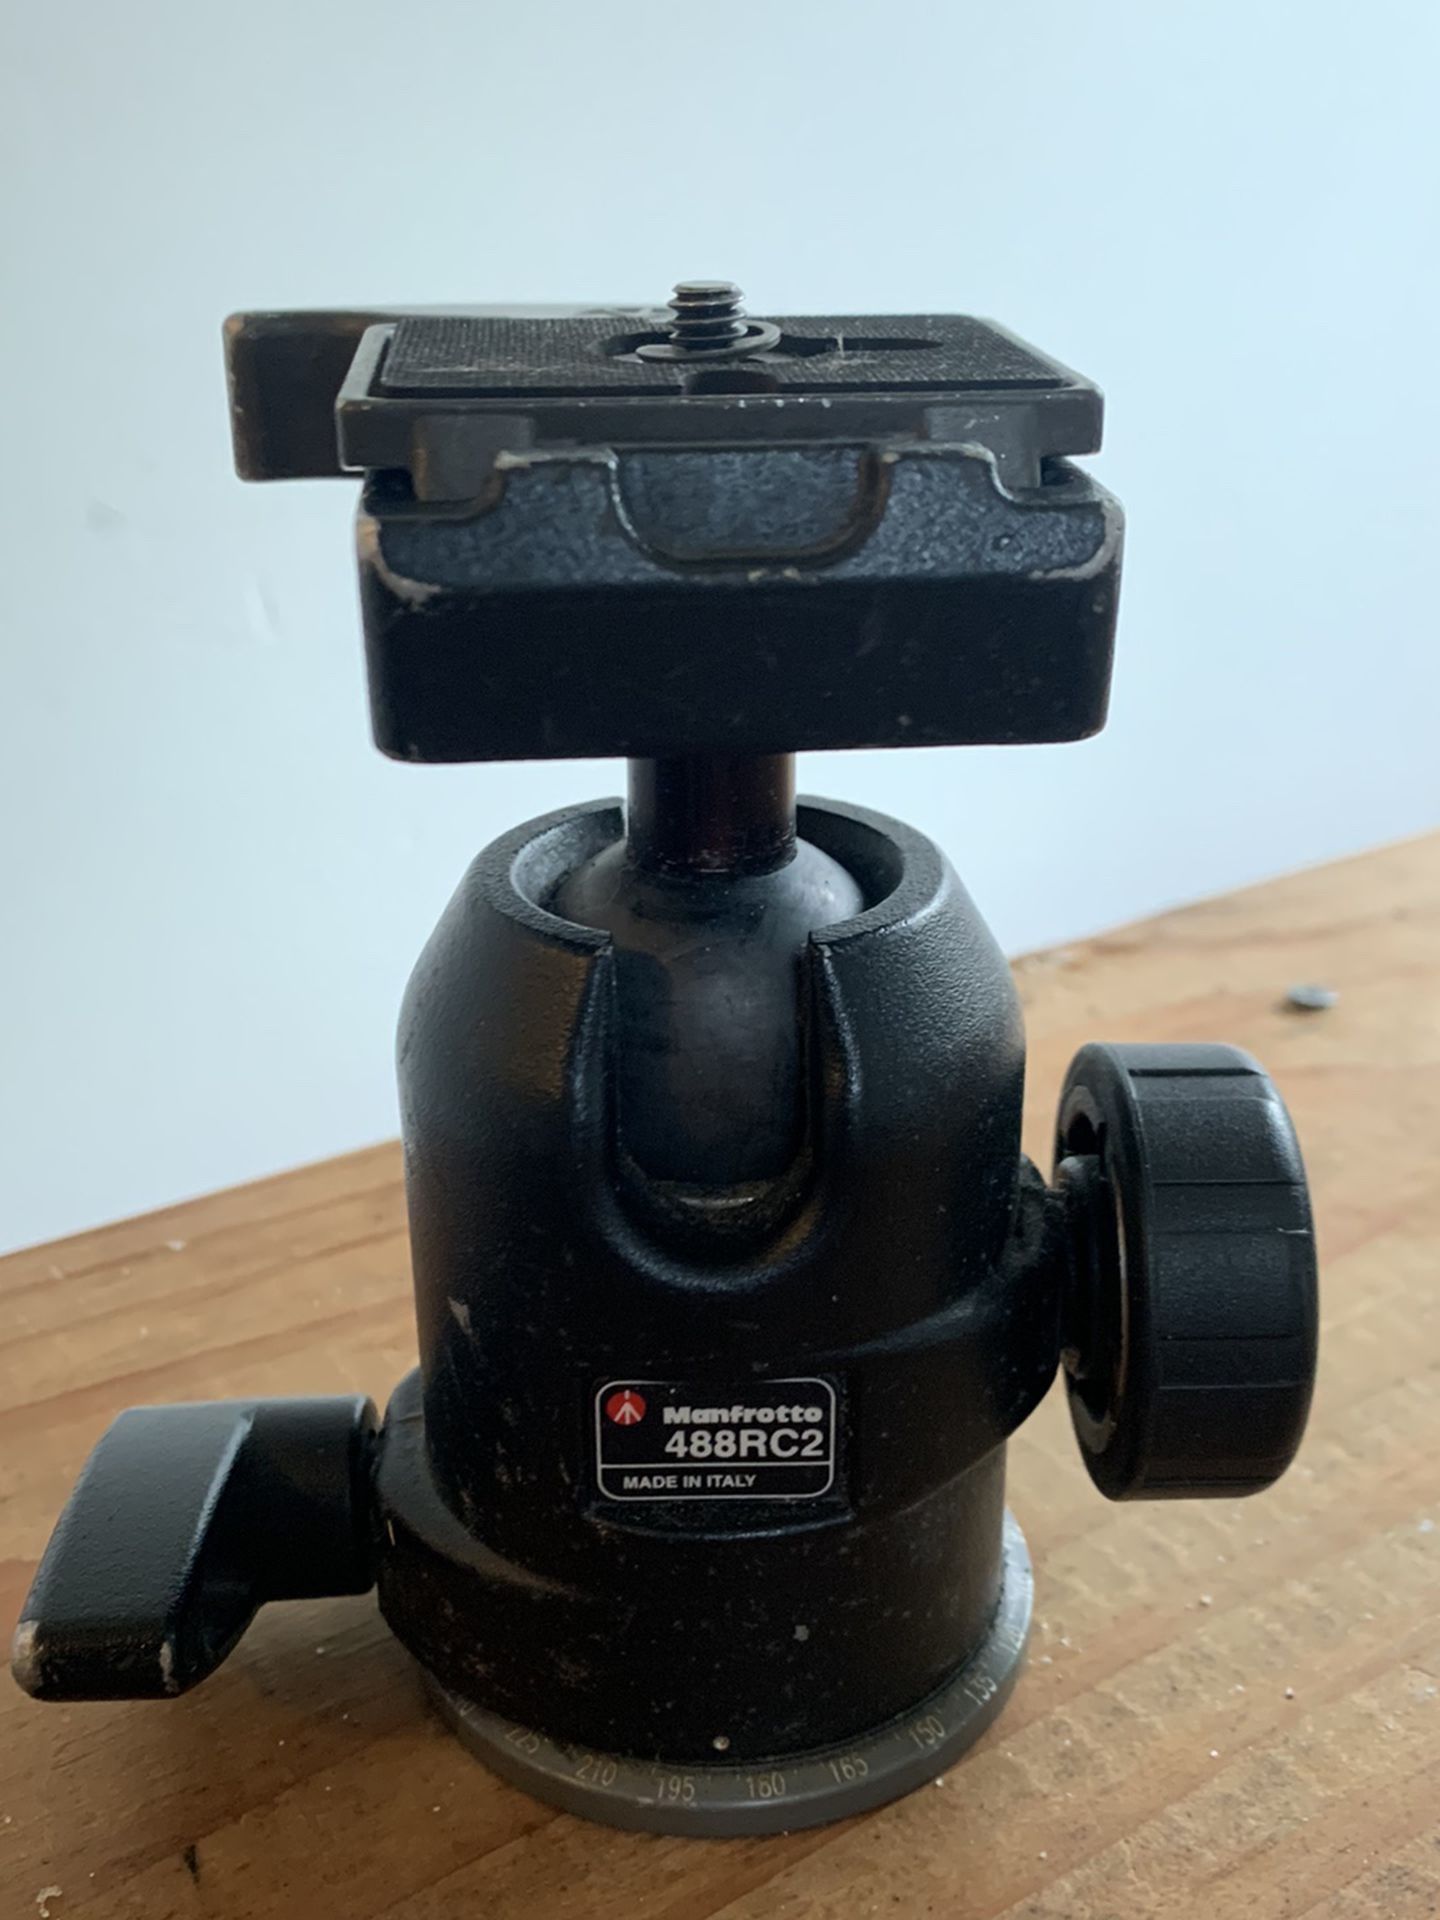 Manfrotto 488RC2 Ball head